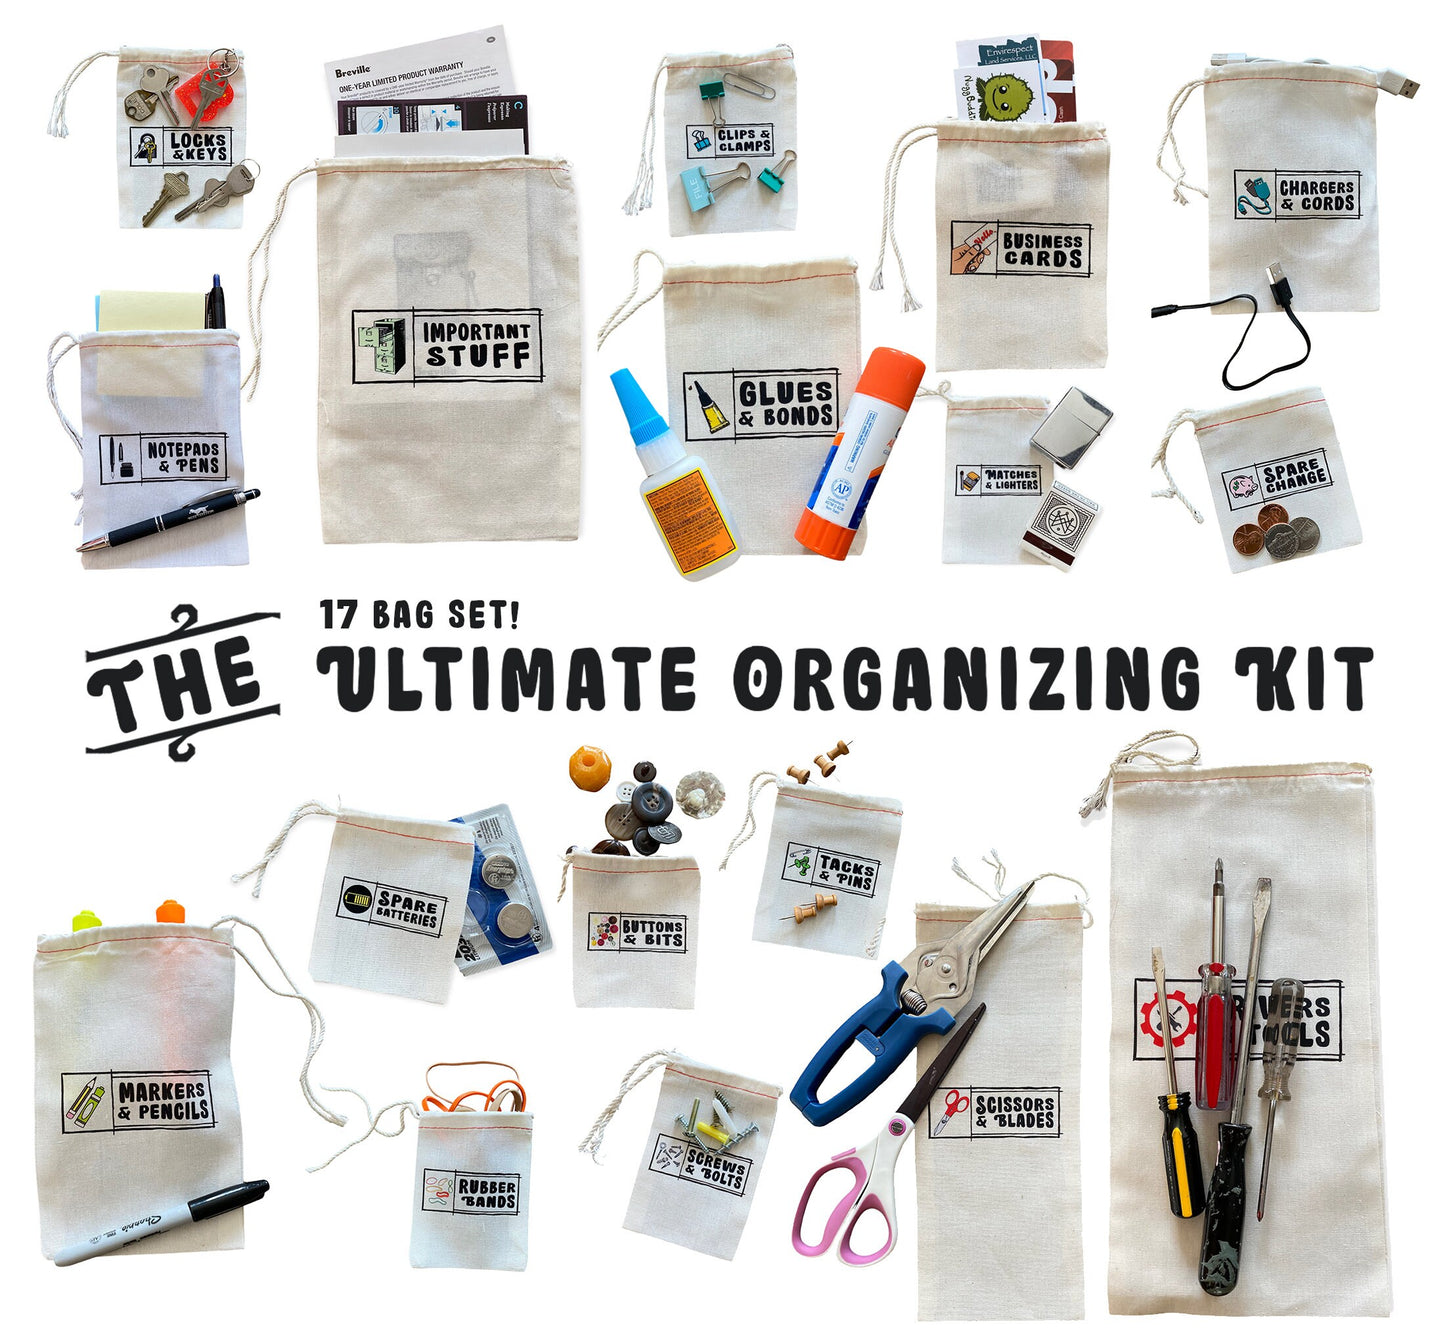 Set of 17 BAGS - Organize clear clutter organizer junk drawer muslin labeled muslin drawstring sturdy bags pouches